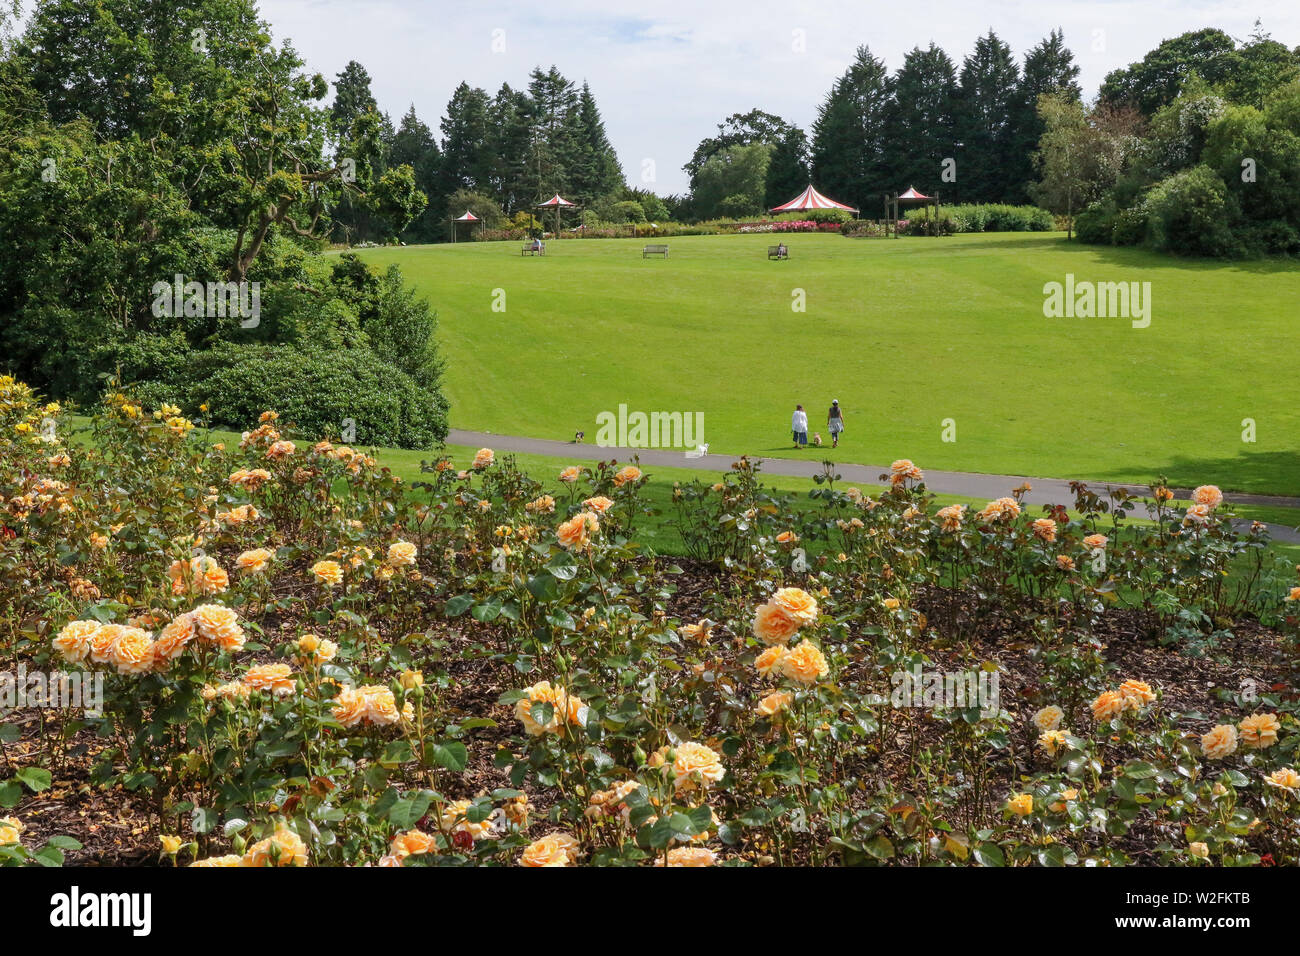 View across the rose gardens at Sir Thomas and Lady Dixon Park in Belfast with people out on a grassy green bank in one of Belfast's public parks. Stock Photo